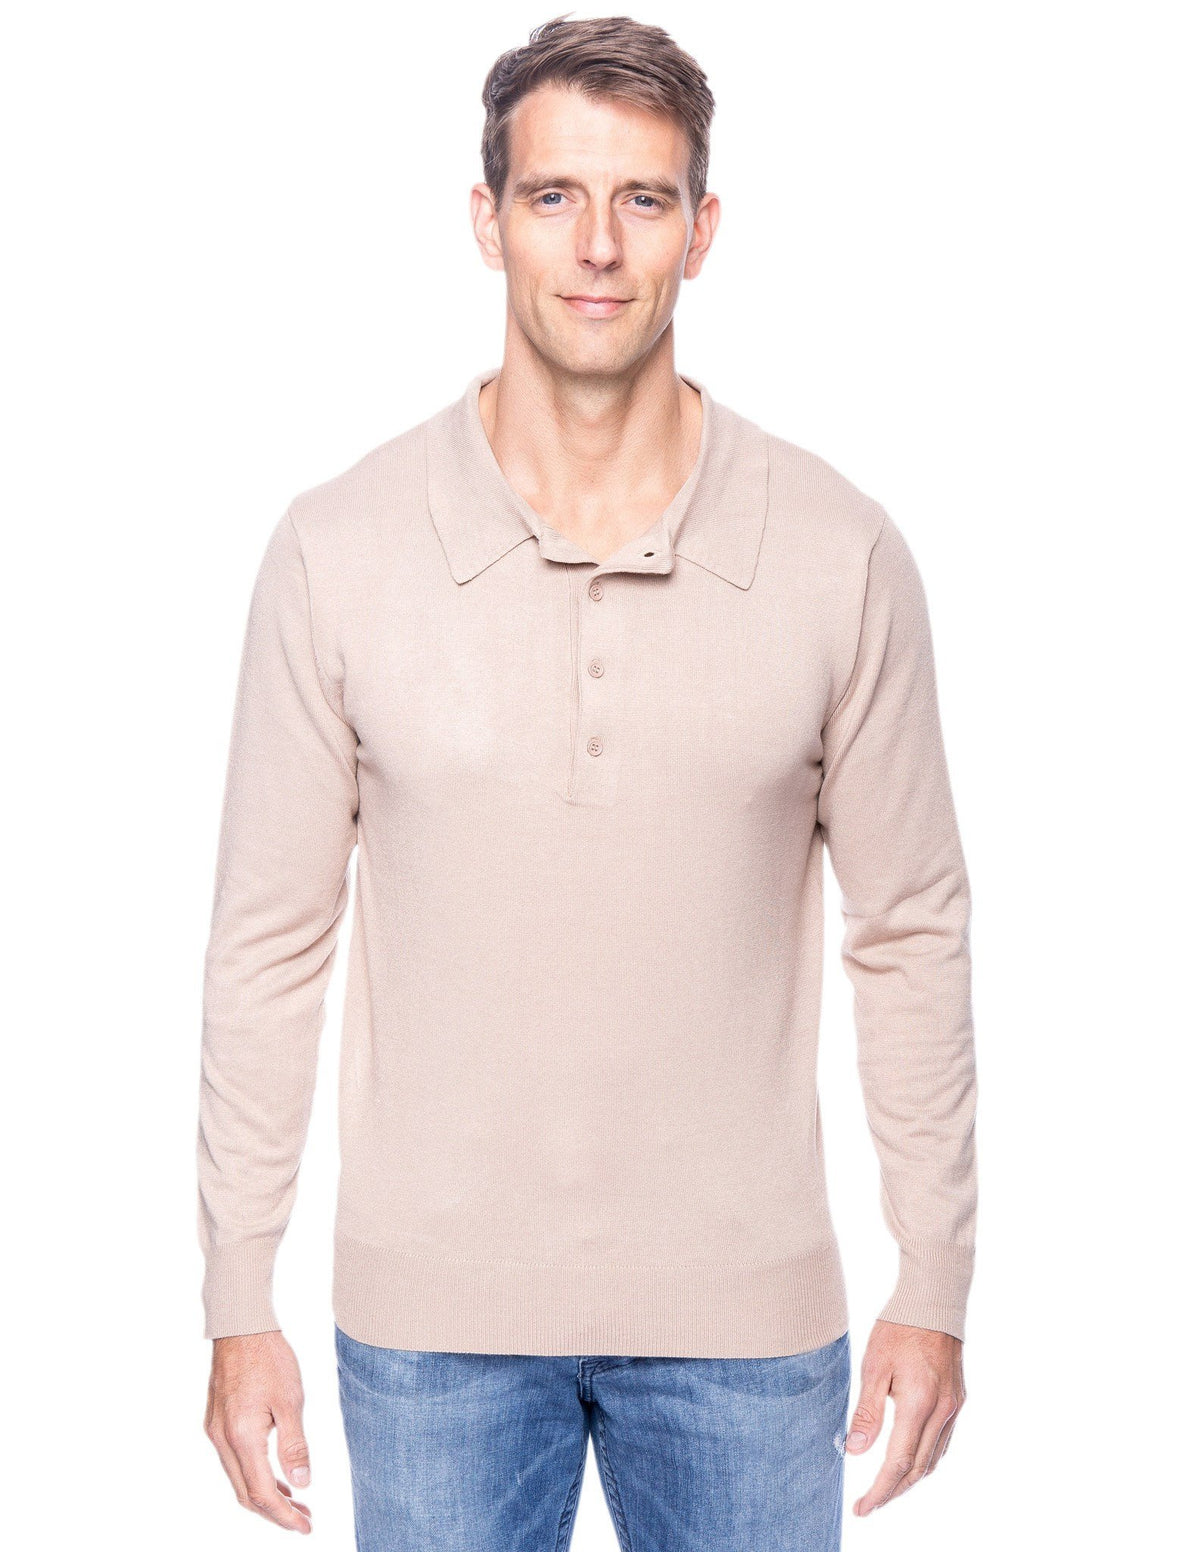 Men's Classic Knit Long Sleeve Polo Sweater - Stone